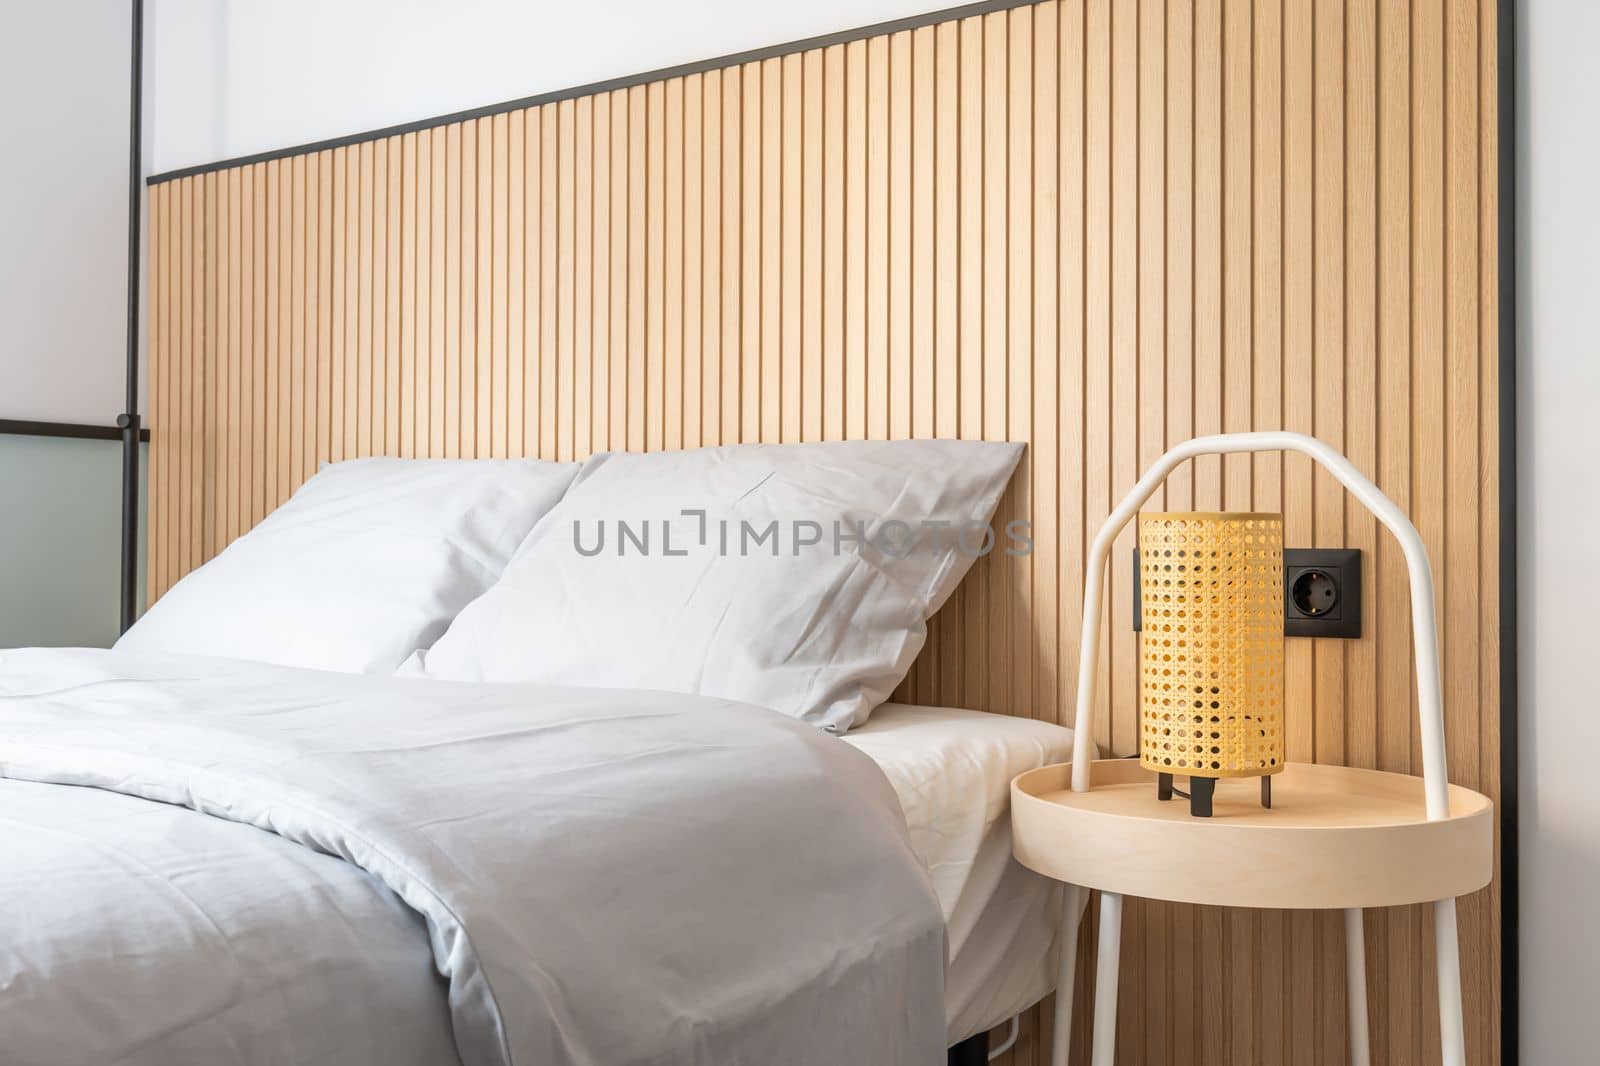 Closeup of a bedroom with a double bed against a white wall with designer wooden elements. On the bedside table is a night lamp with a yellow shade